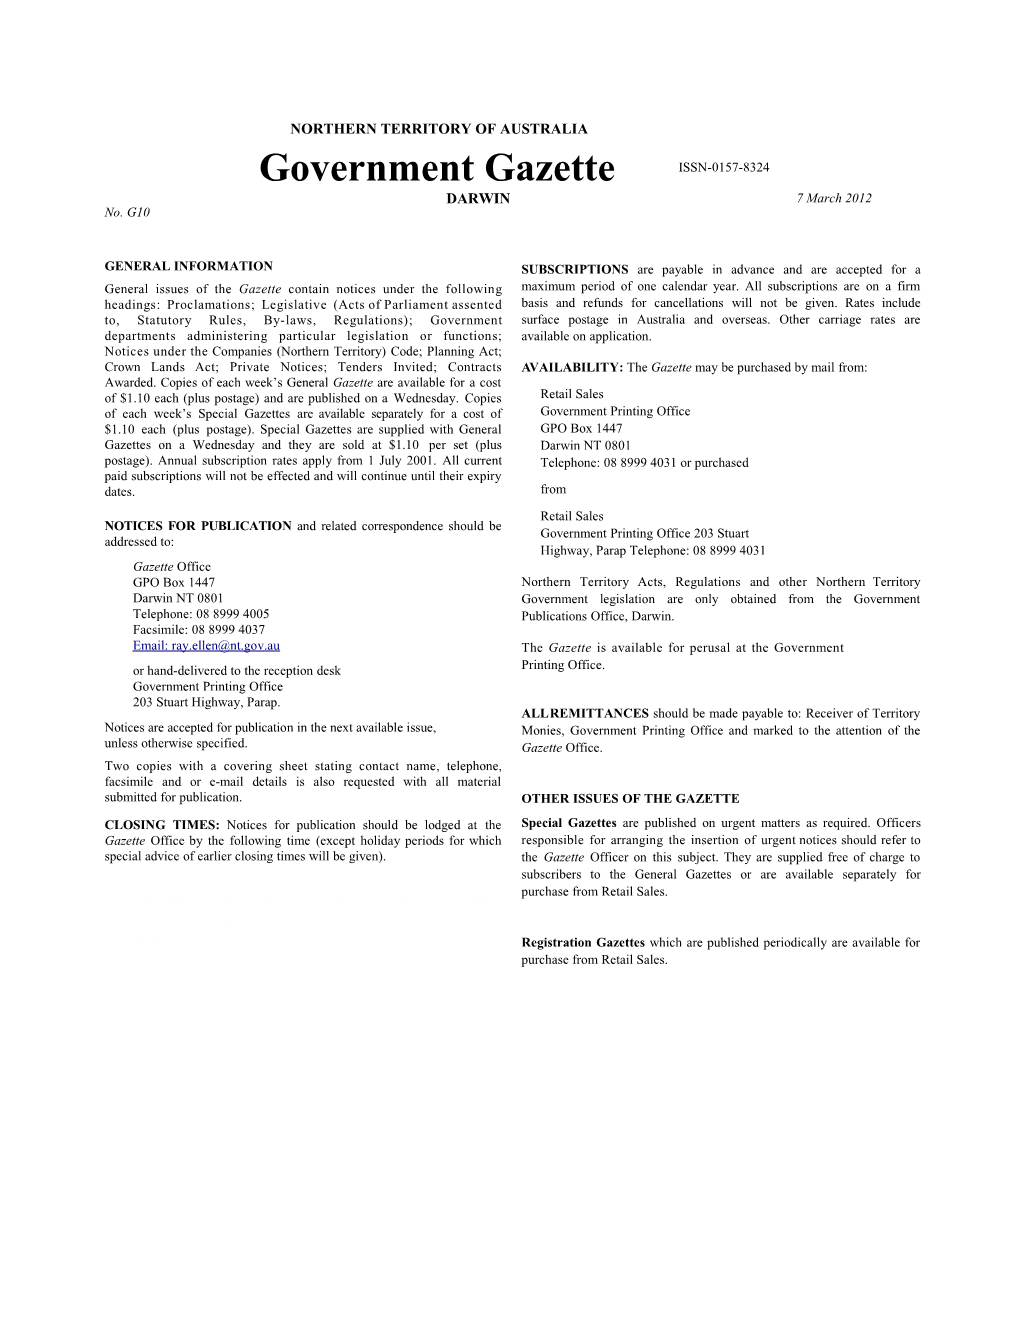 Governmentgazette ISSN-0157-8324